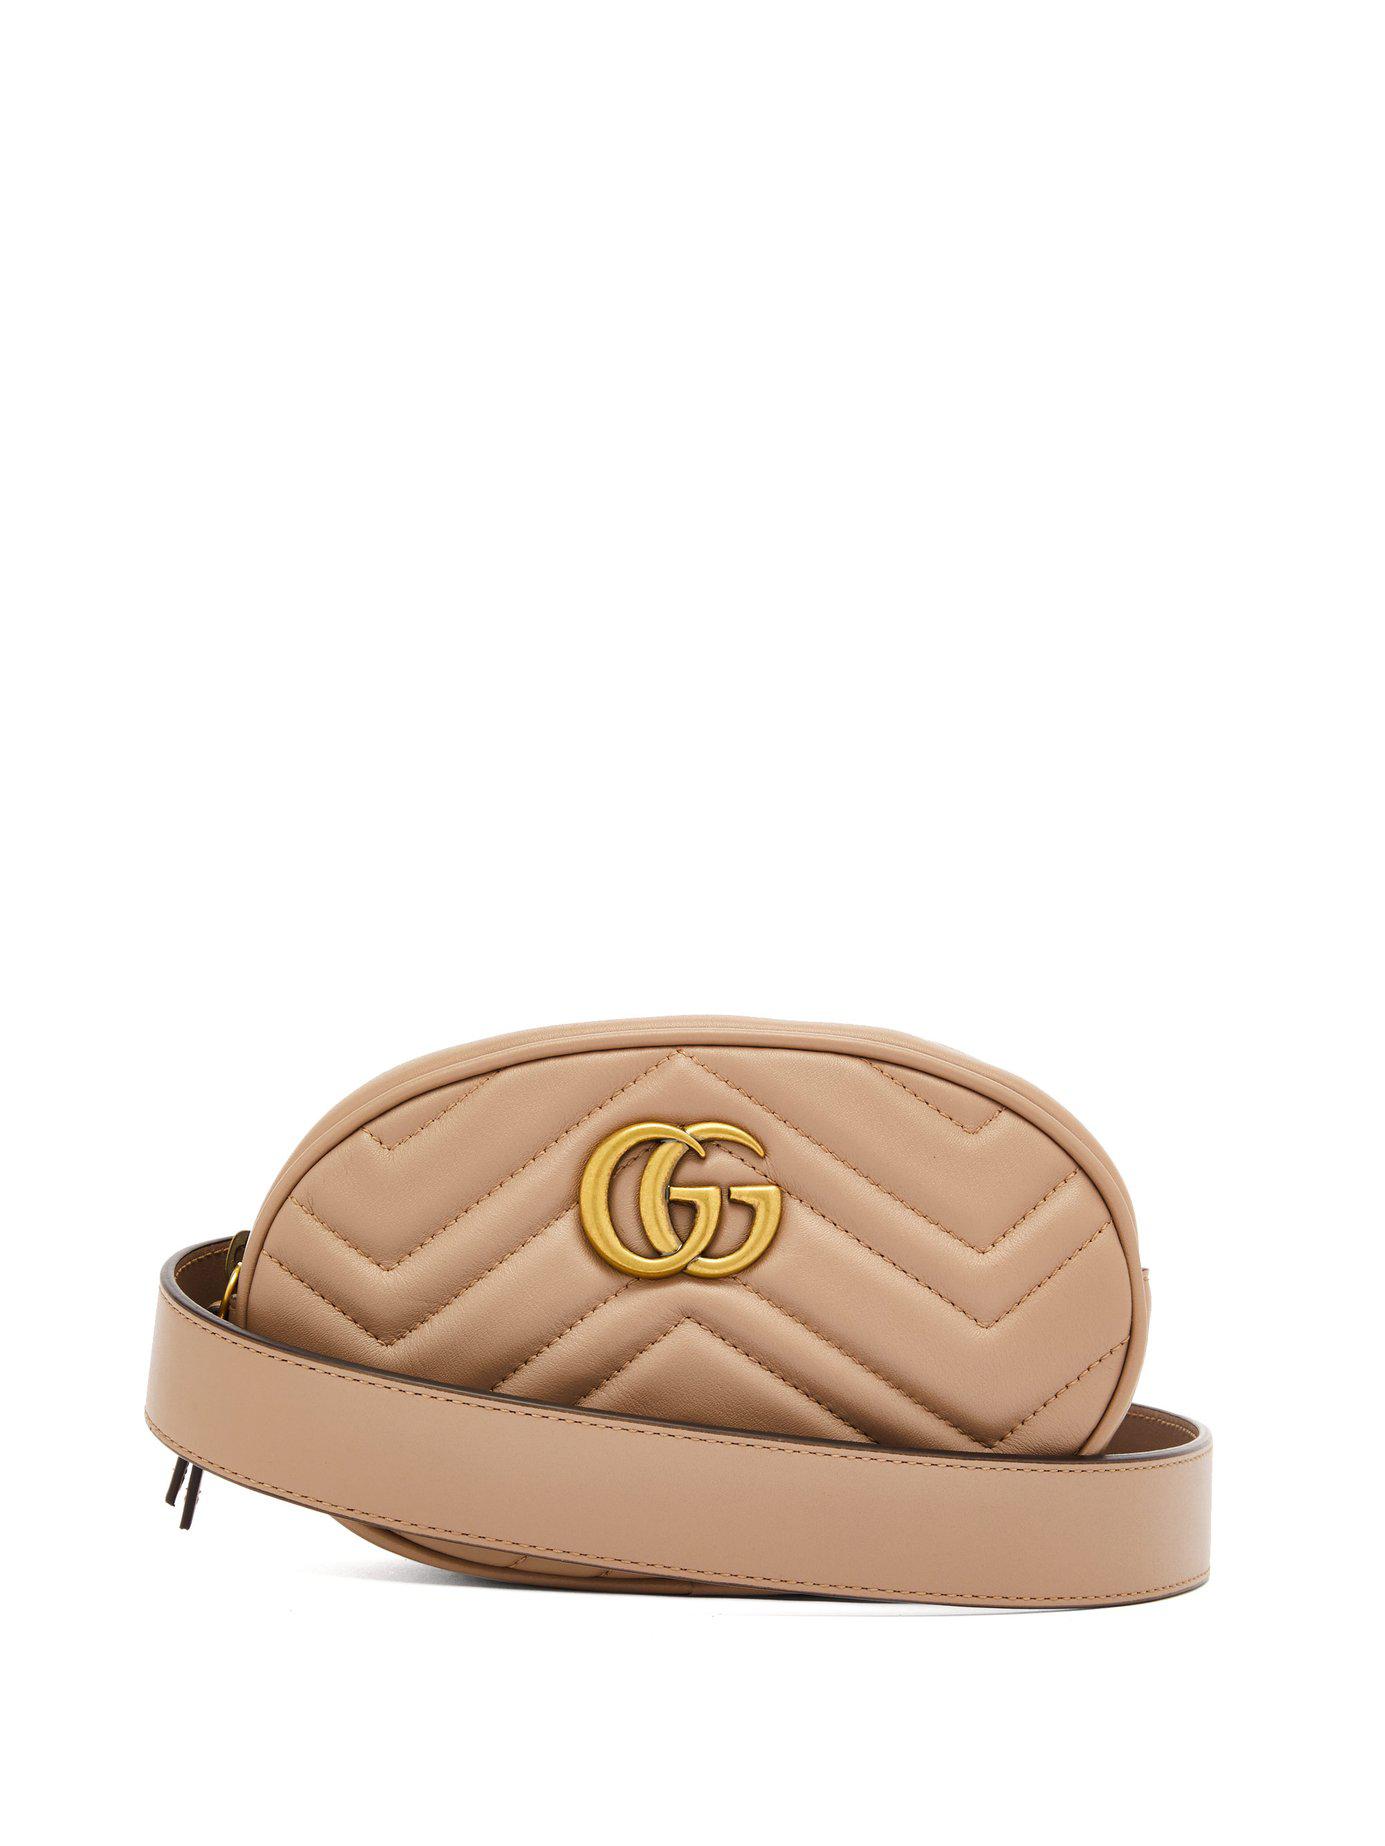 Gucci Gg Marmont Quilted-leather Belt Bag in Nude (Natural) - Lyst